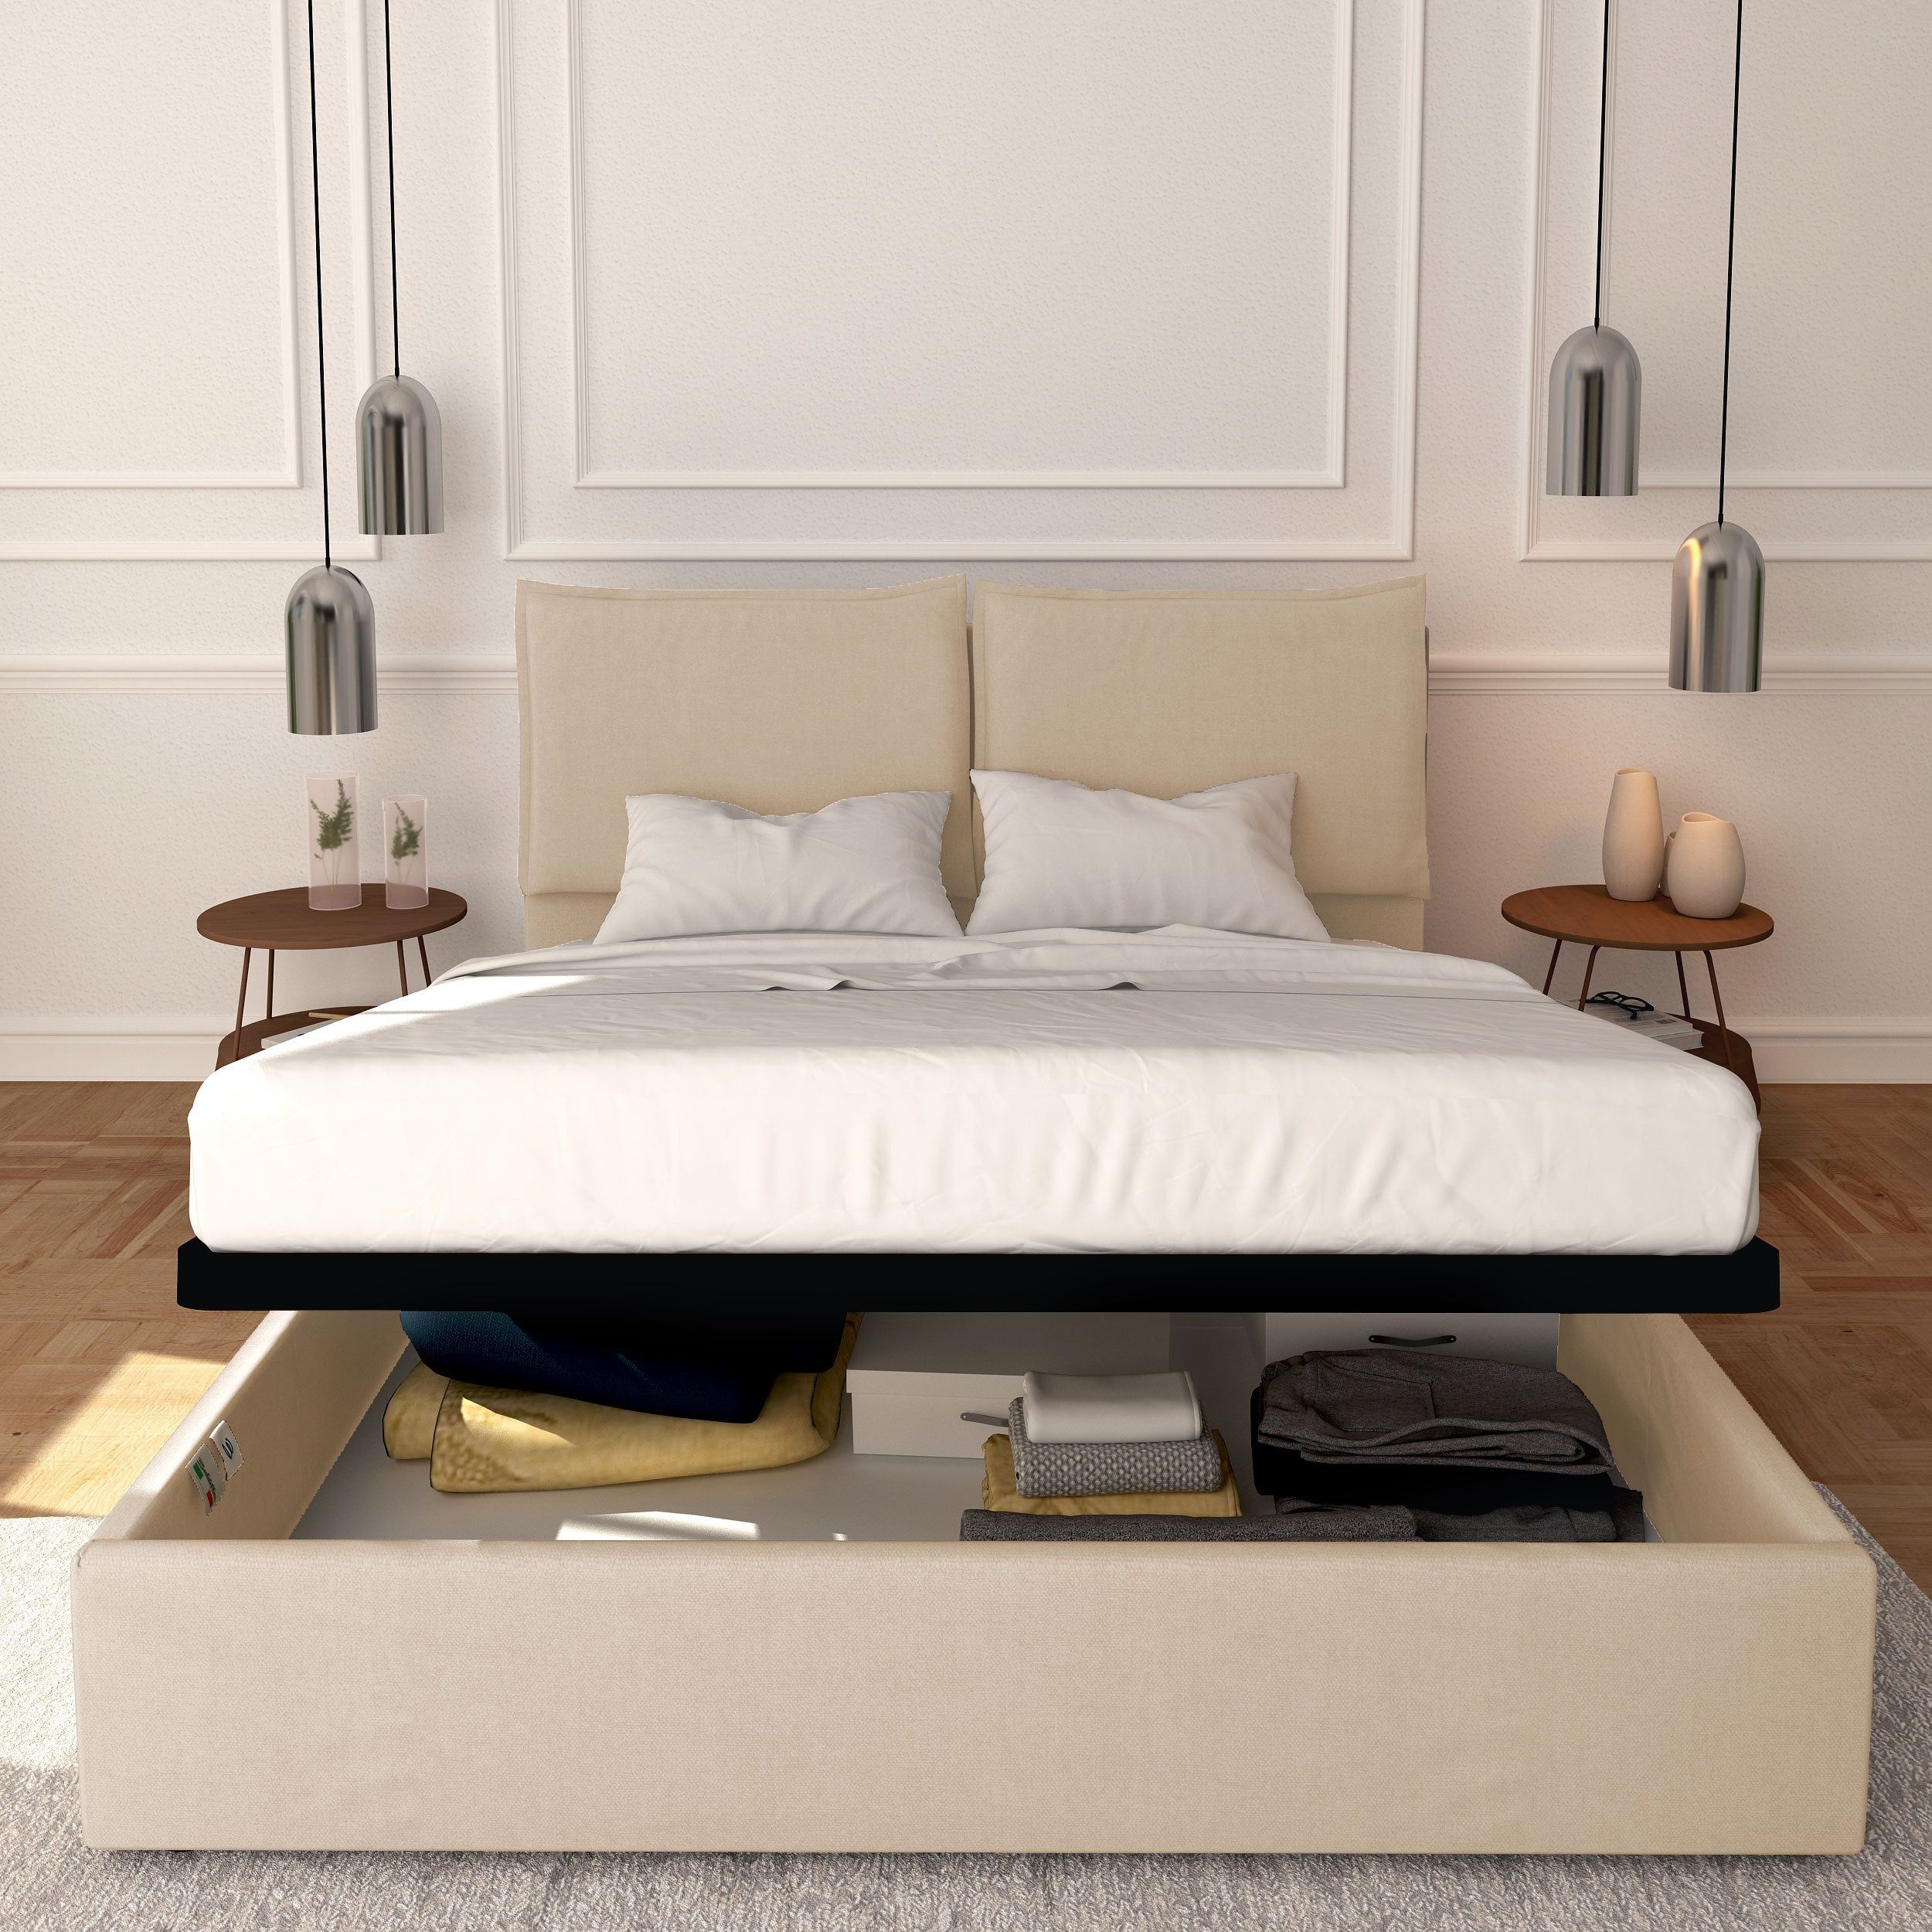 Double Bed With Storage : The Benefits of Having a Double Bed With Storage in Your Bedroom